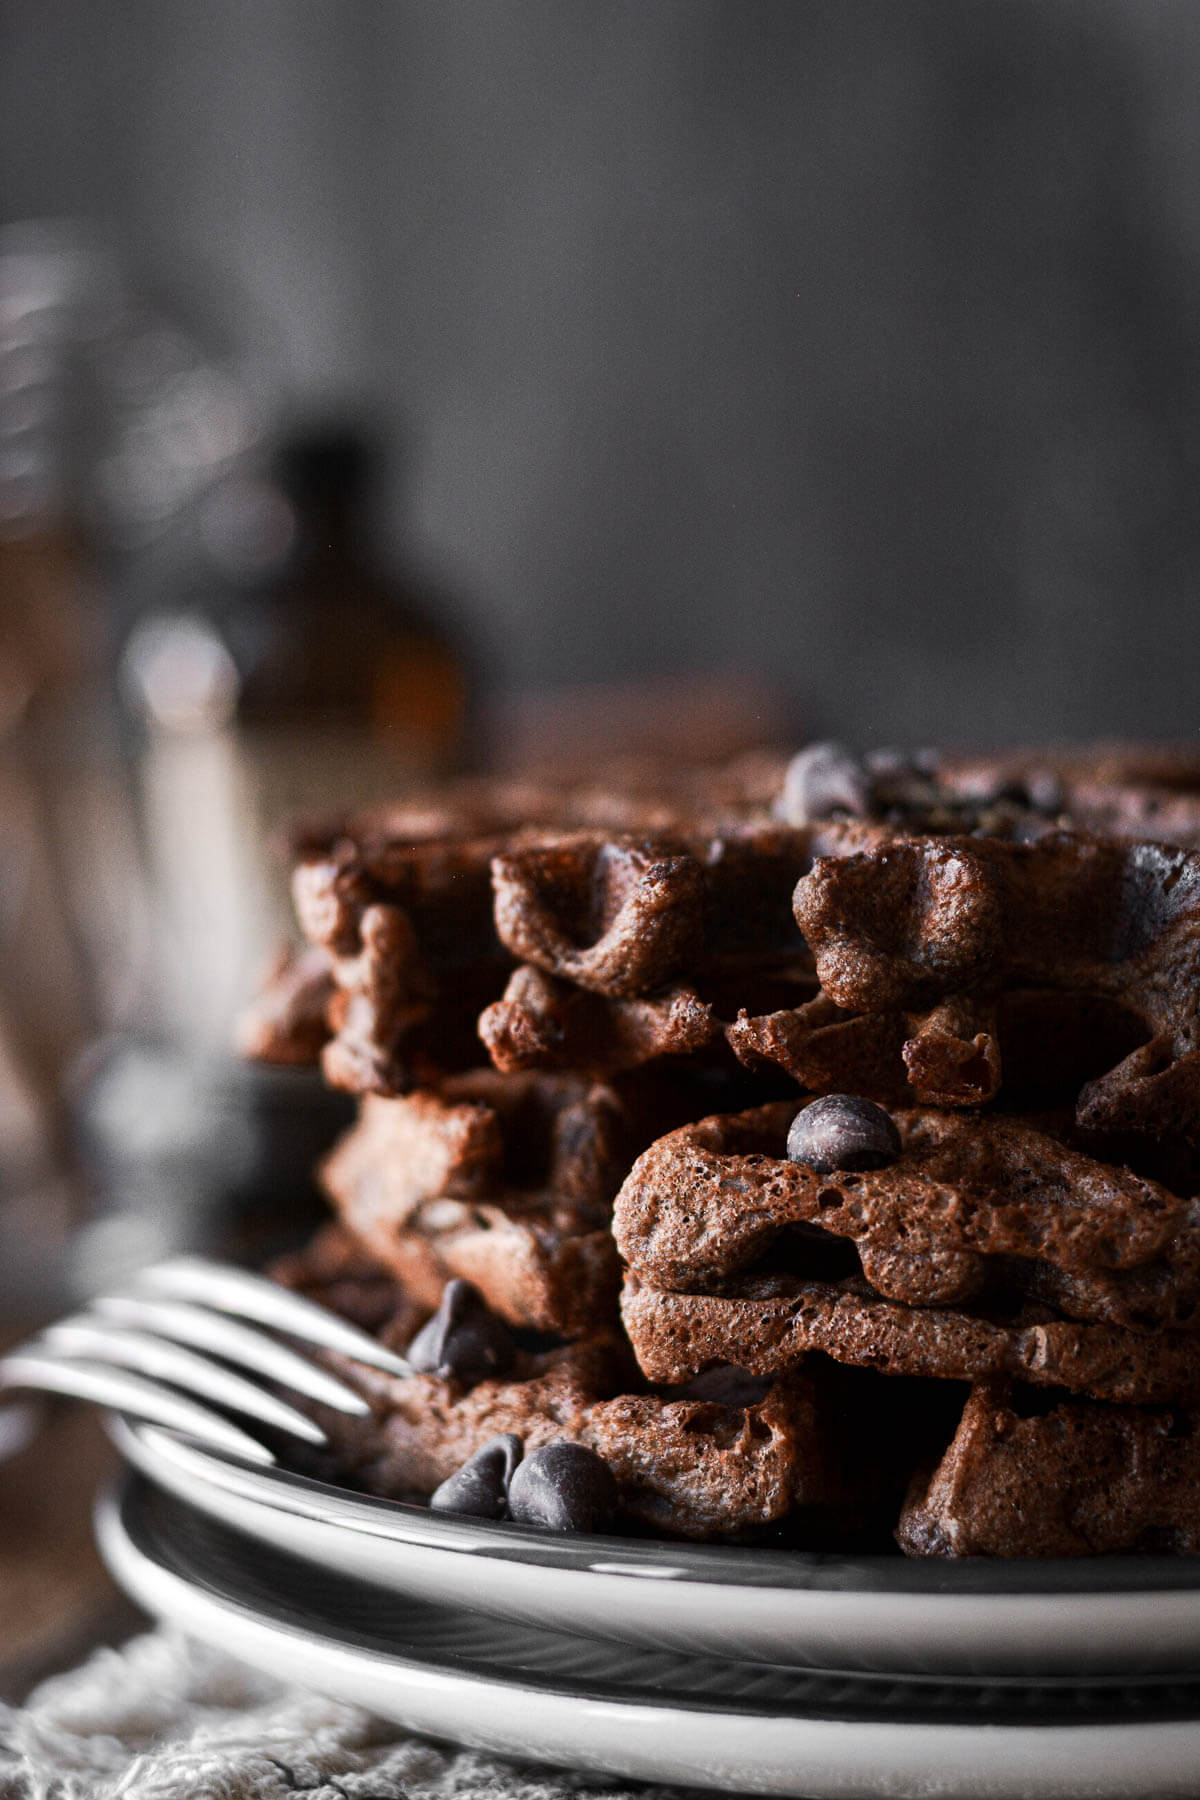 Stack of chocolate waffles on a plate.